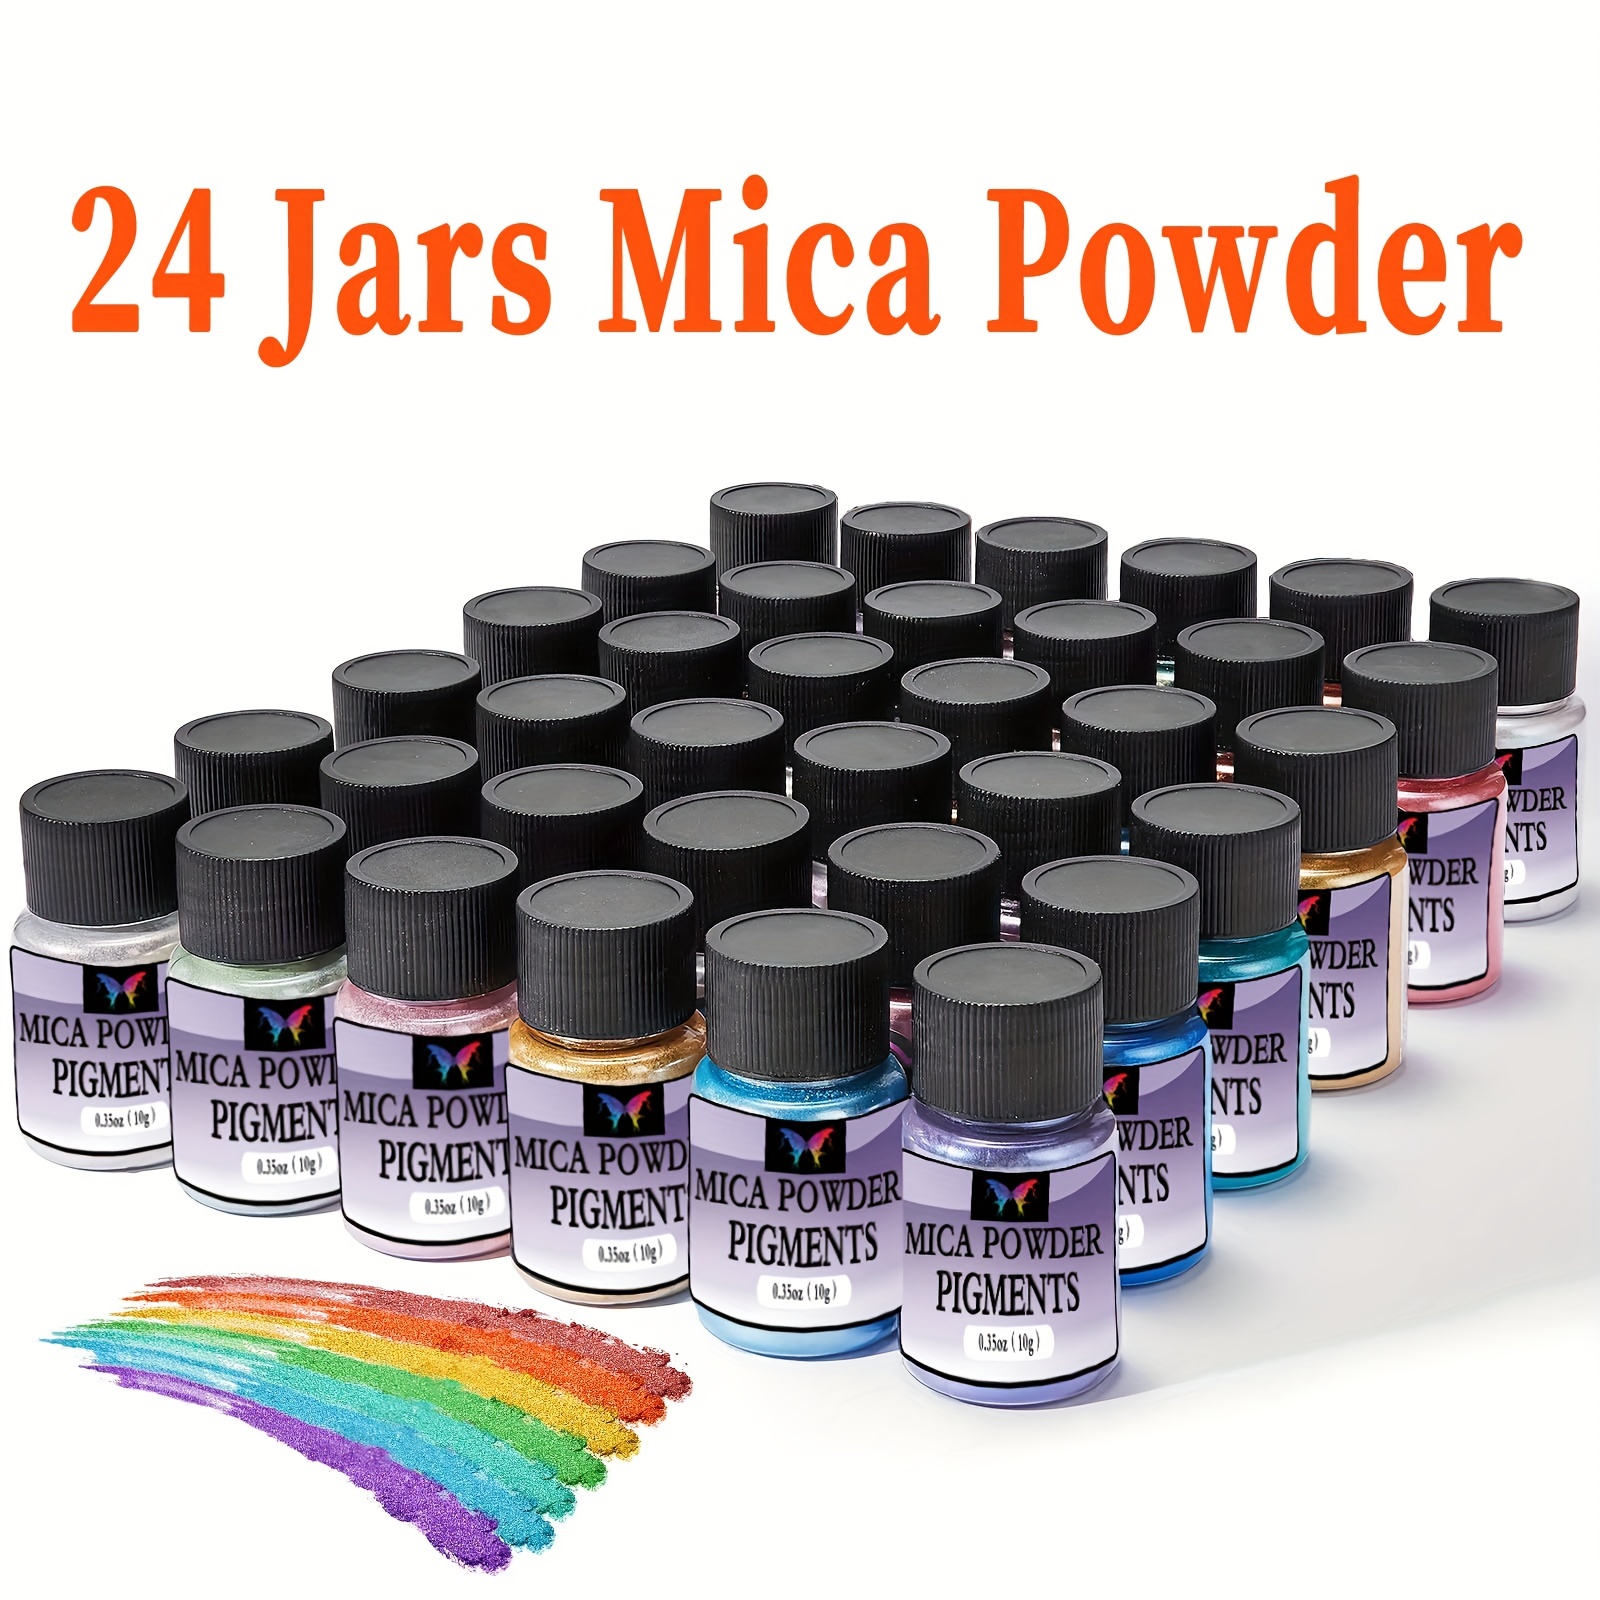 Fantastory Mica Powder for Epoxy Resin, 32 Colors(0.35oz/10g) Cosmetic  Grade Pigment Powder, Incl. 6 Jars Glitter Mica Powders for Candle Making,  Car